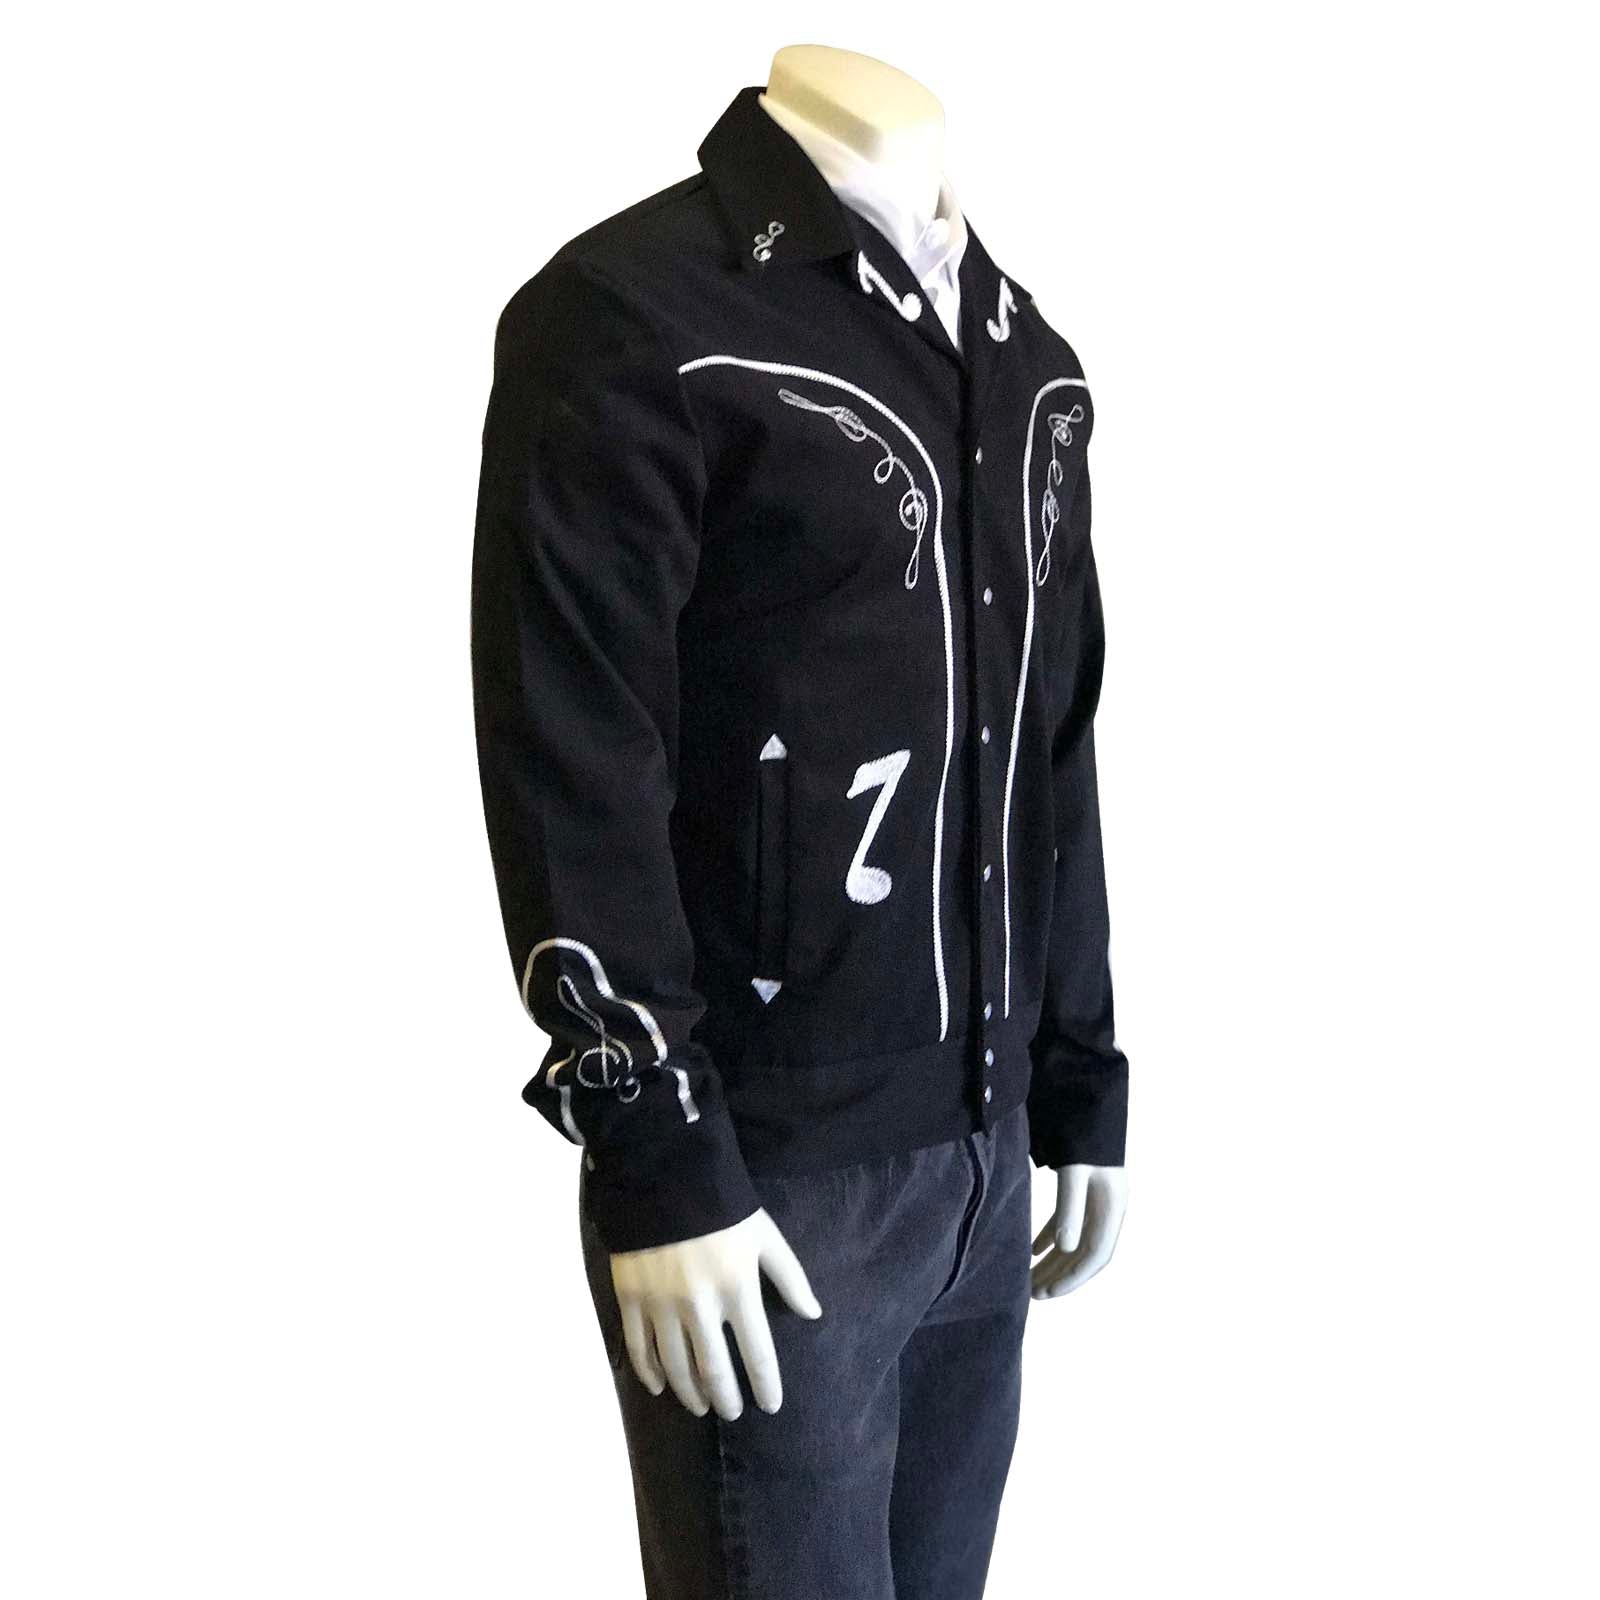 Men's Vintage Western Bolero Jacket with Musical Notes Embroidery - Rockmount